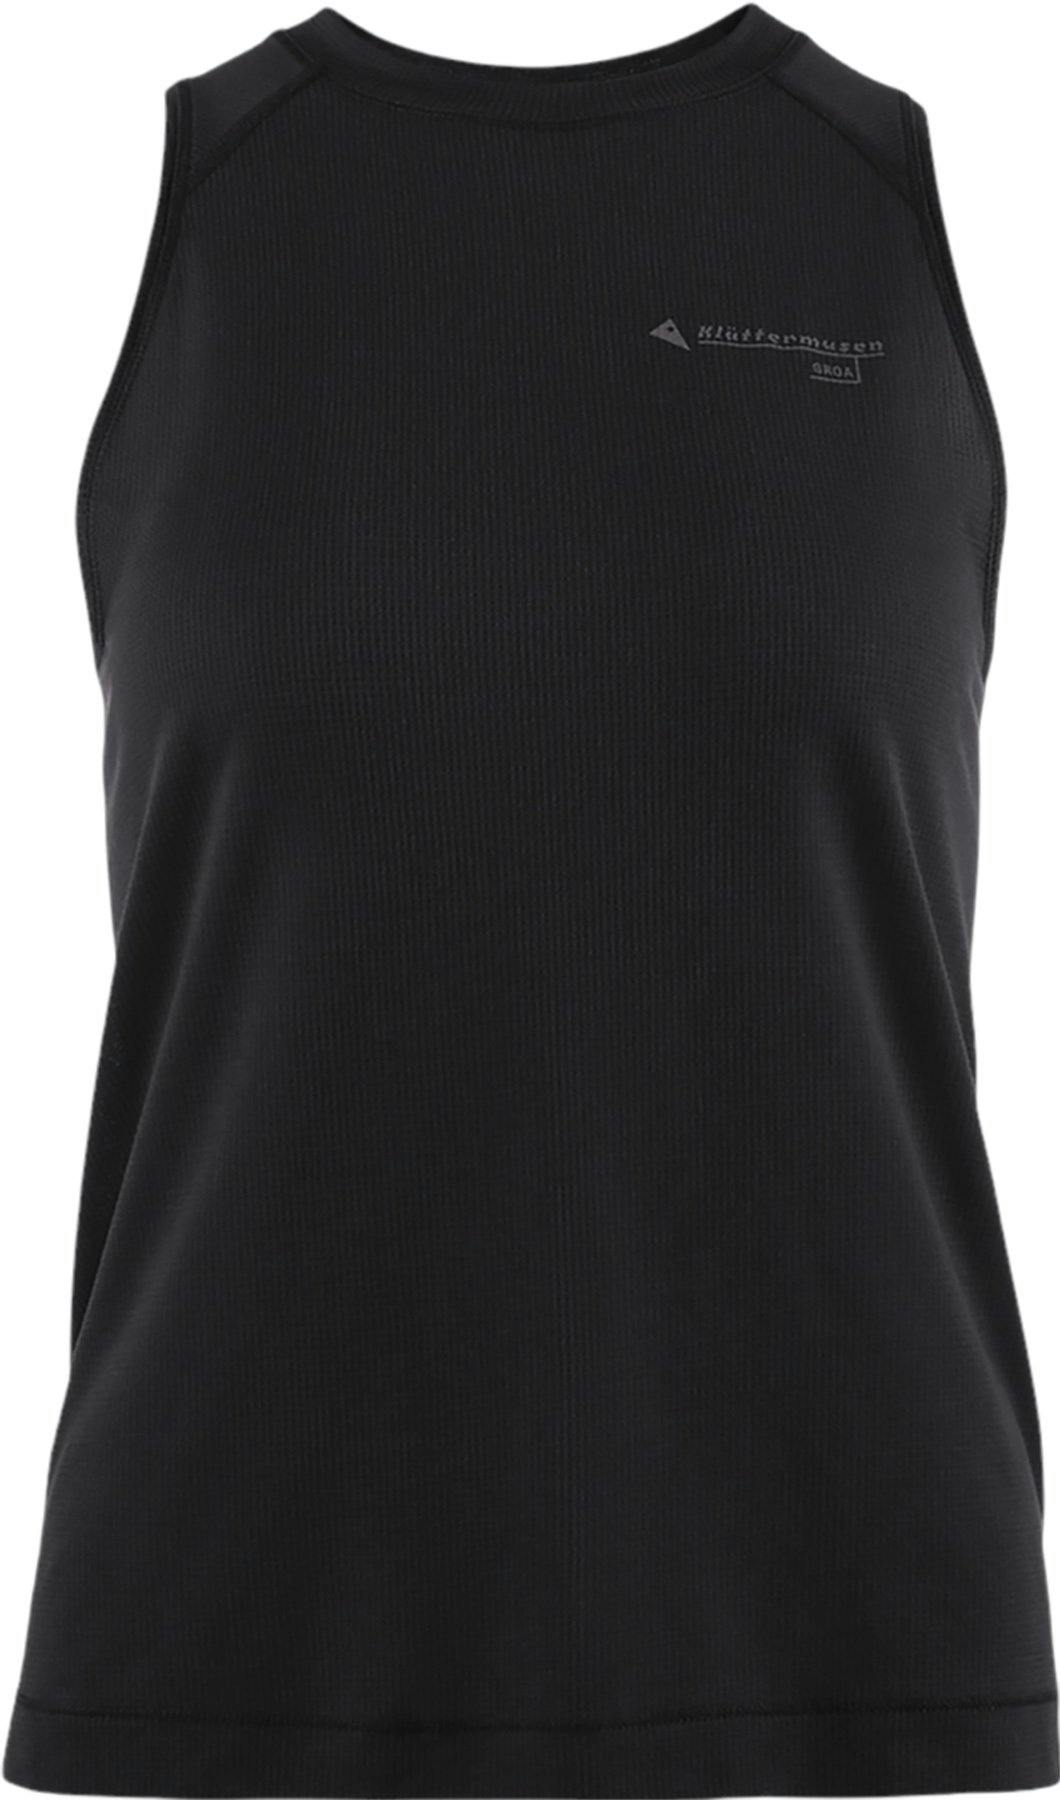 Product image for Groa Tank Top - Women's